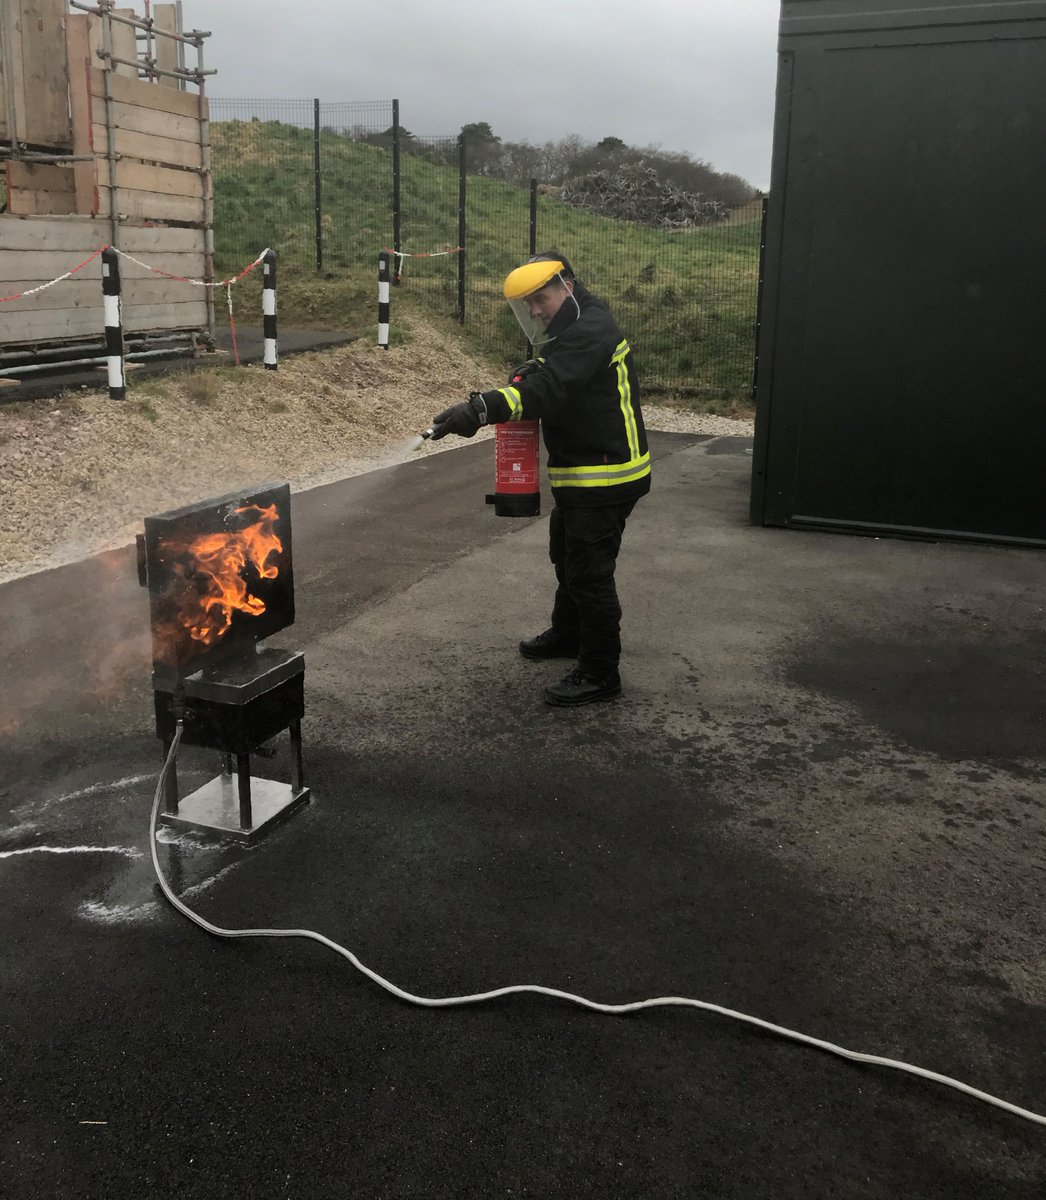 Does your employees know how to put a fire out? Here our employees complete constant ongoing training on site to ensure full competency and confidence if found in this scenario. For more information regarding training, please contact rstorey-cic@clevelandfire.gov.uk #fire